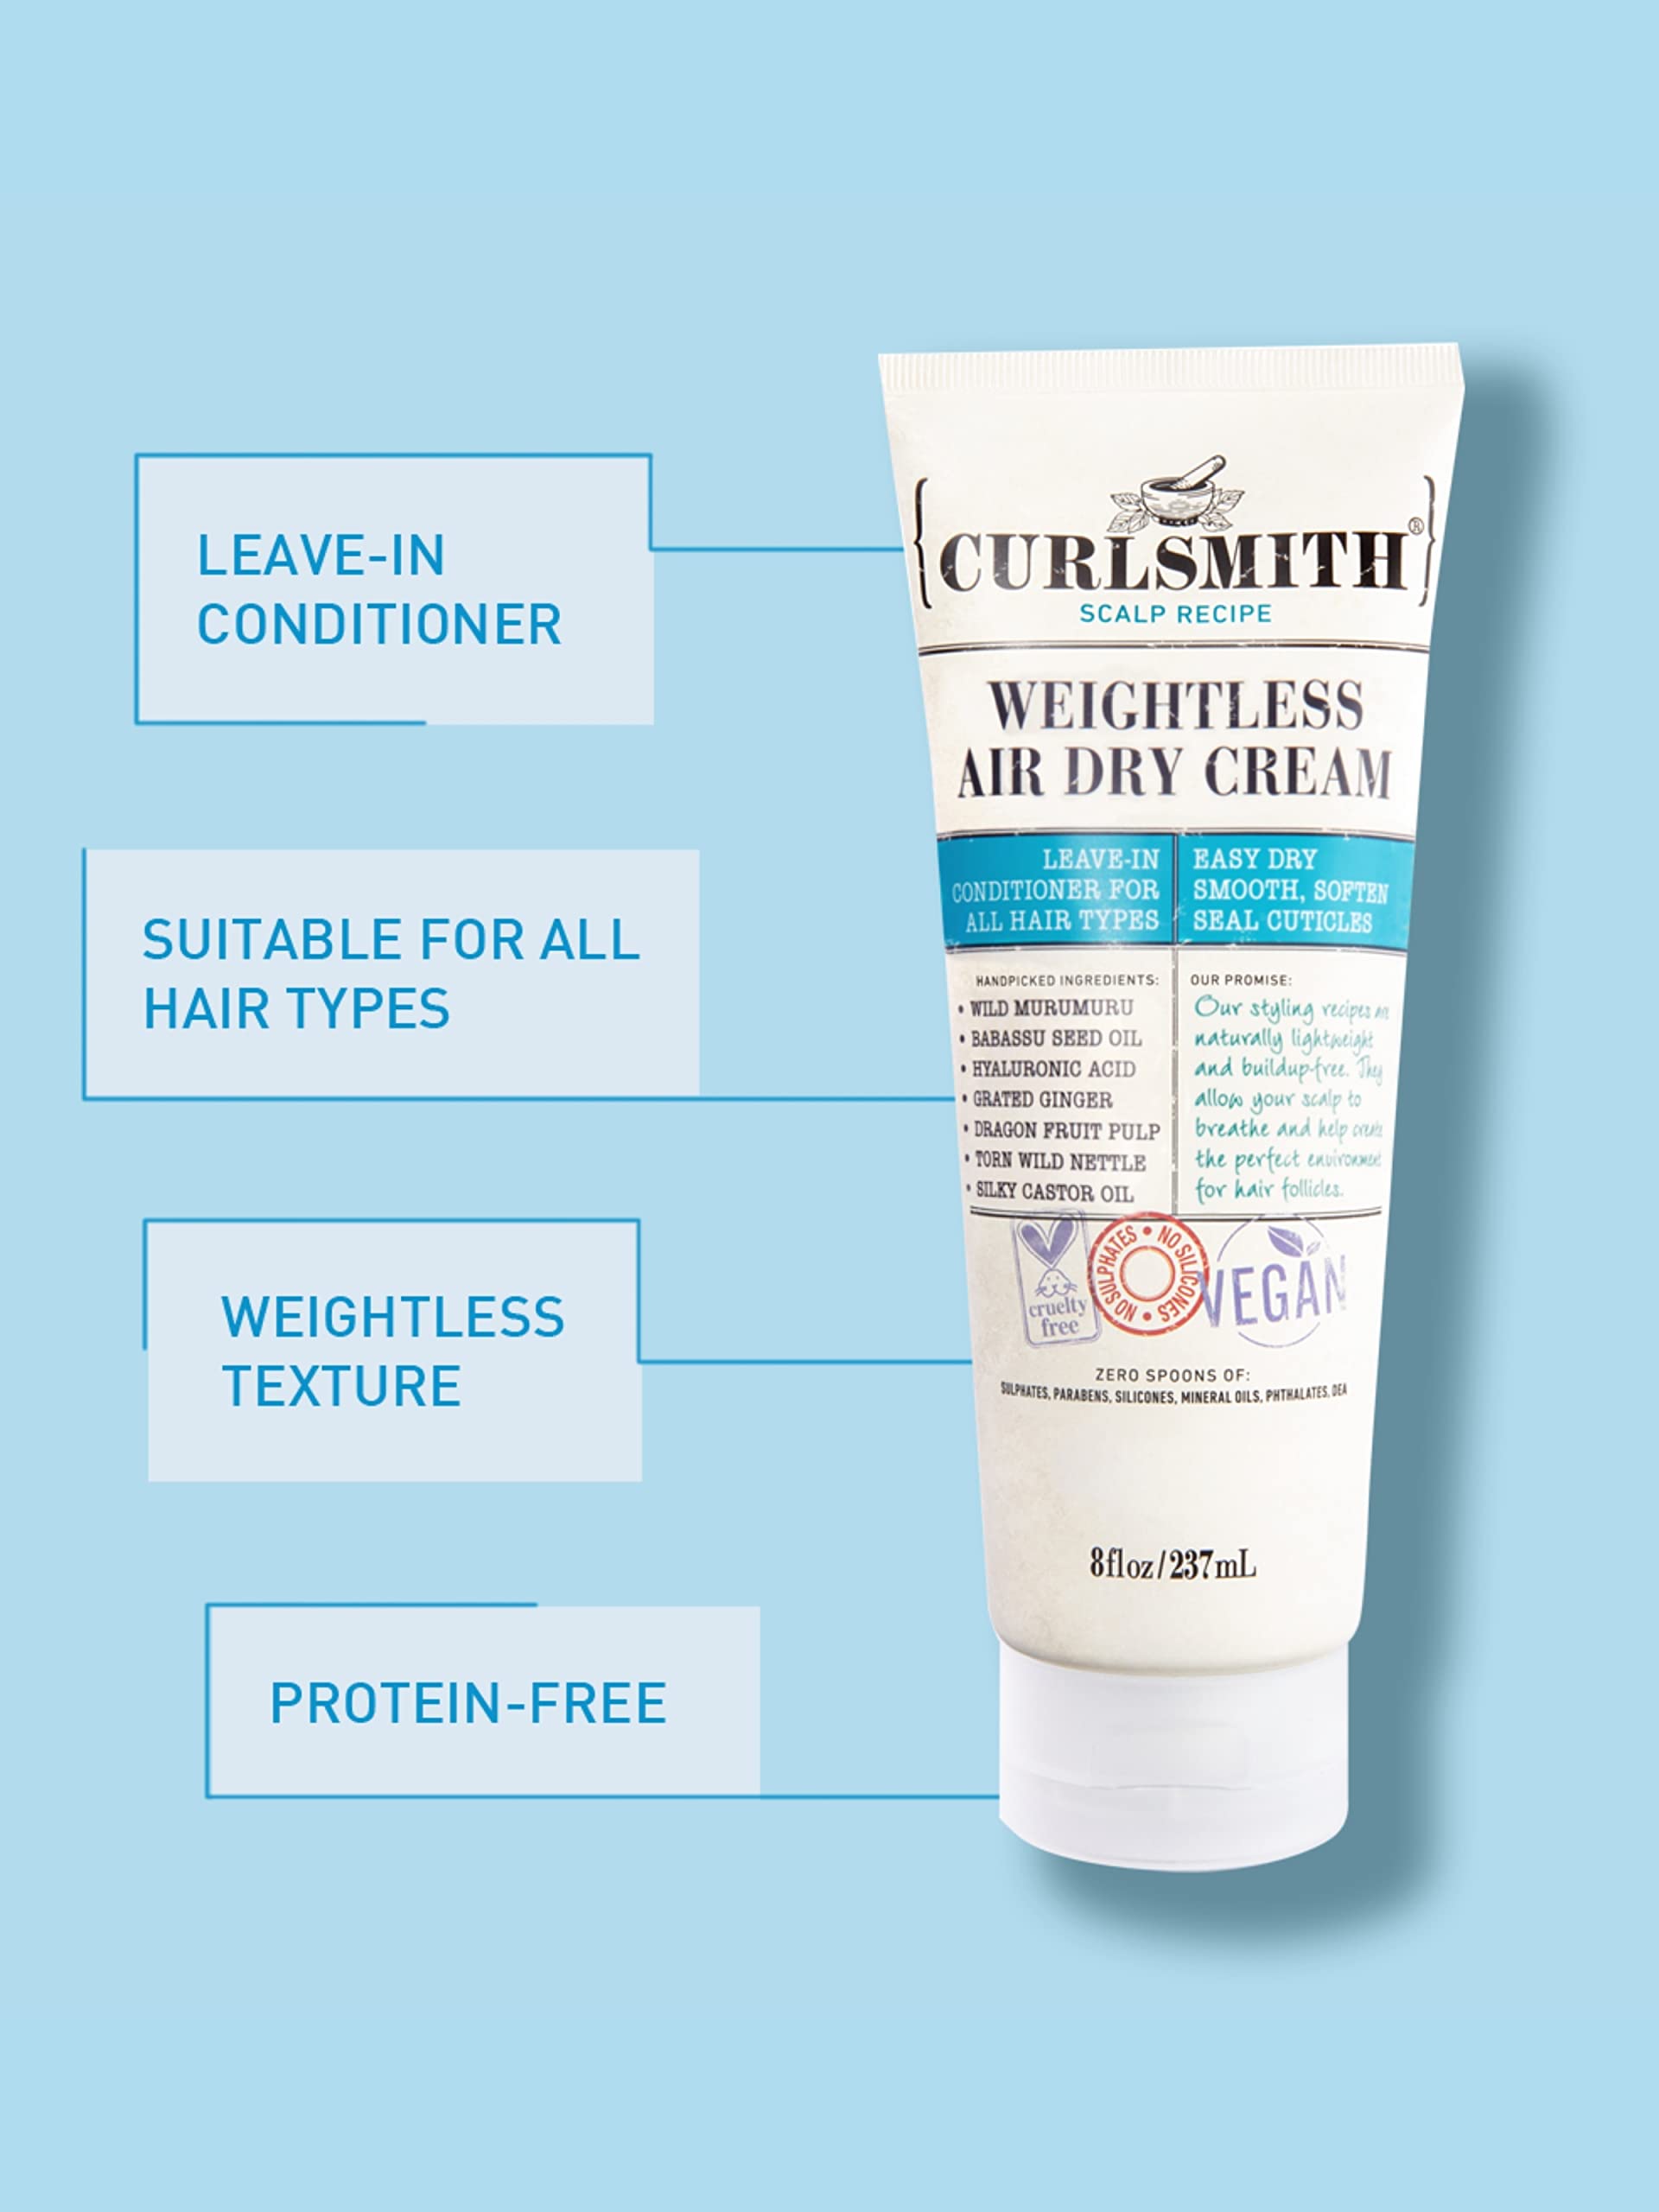 CURLSMITH - Weightless Air Dry Cream - Vegan Leave-In Conditioner for Any Hair Type, Smooths Hair (8 fl oz)